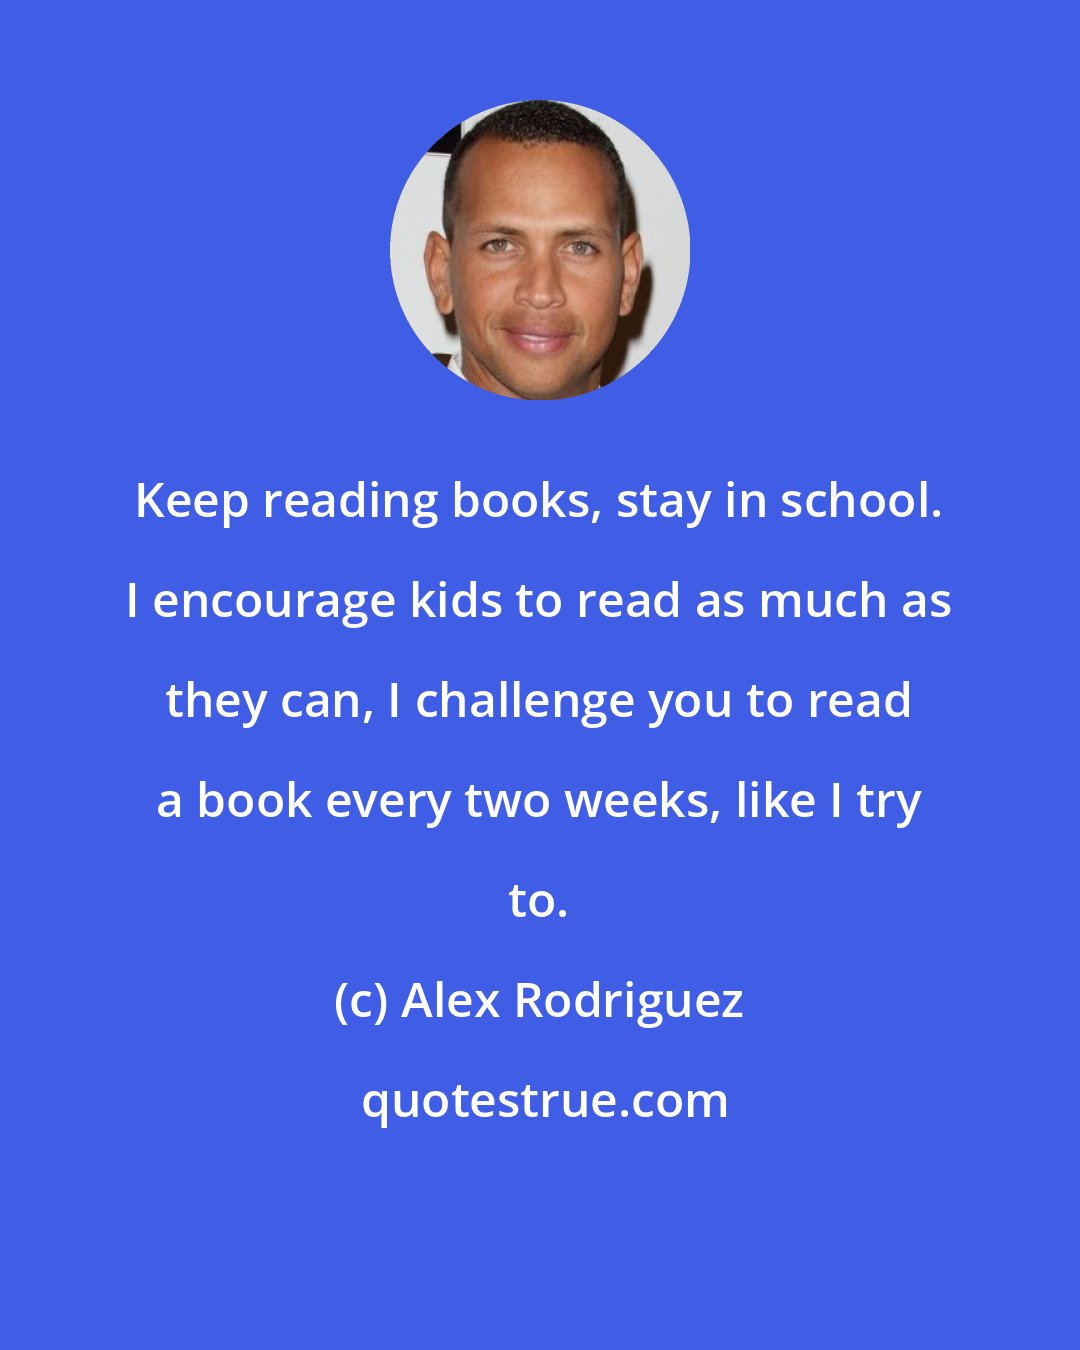 Alex Rodriguez: Keep reading books, stay in school. I encourage kids to read as much as they can, I challenge you to read a book every two weeks, like I try to.